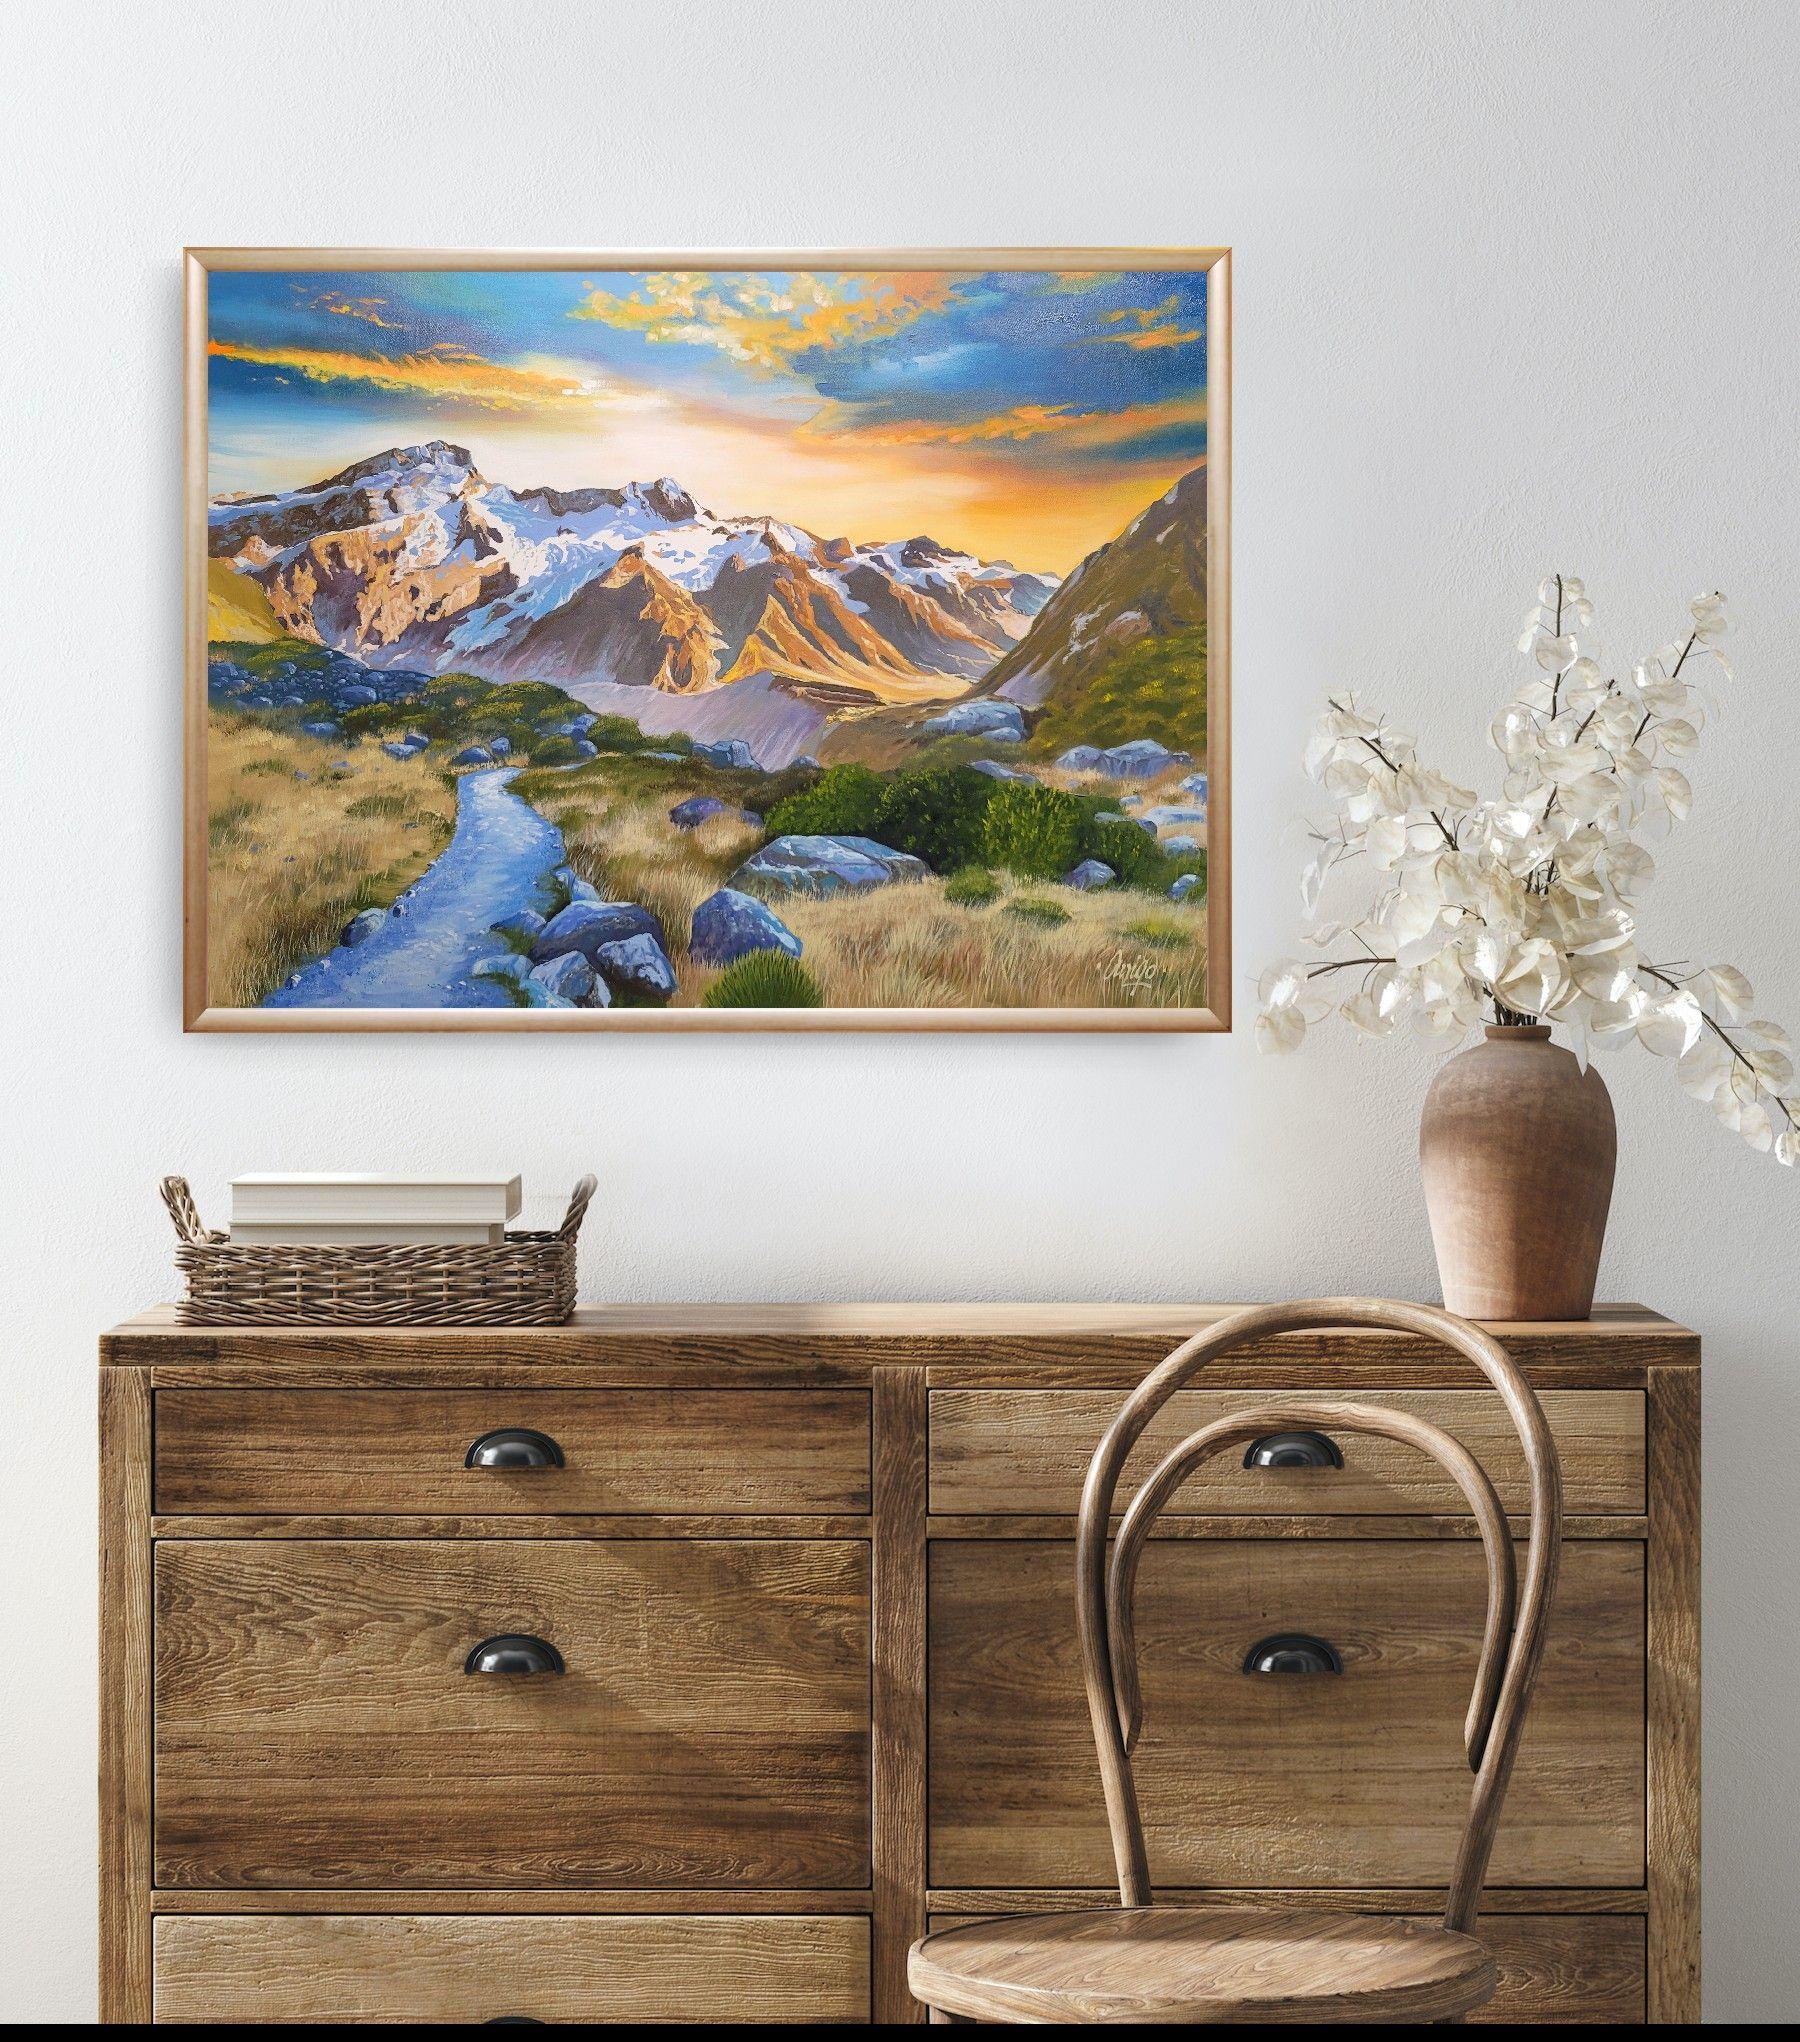 The majestic vista of the mountains of the South Island Range in New Zealand. View from the walking path that leads down into the deep valley at the foot of this incredible sight.   :: Painting :: Contemporary :: This piece comes with an official